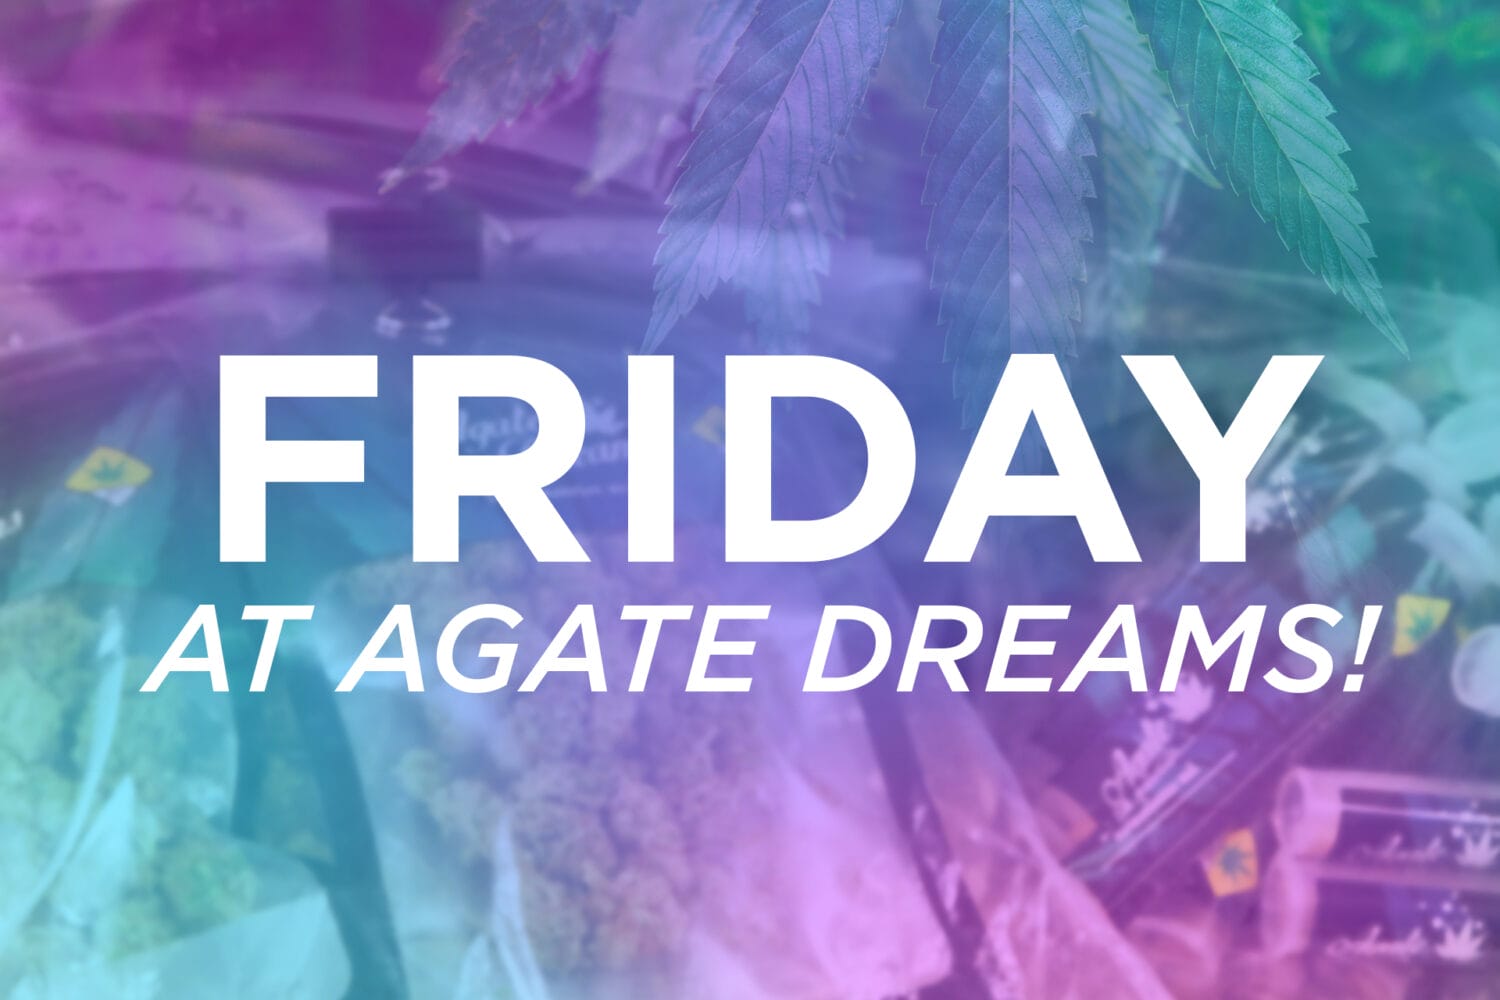 Friday at Agate